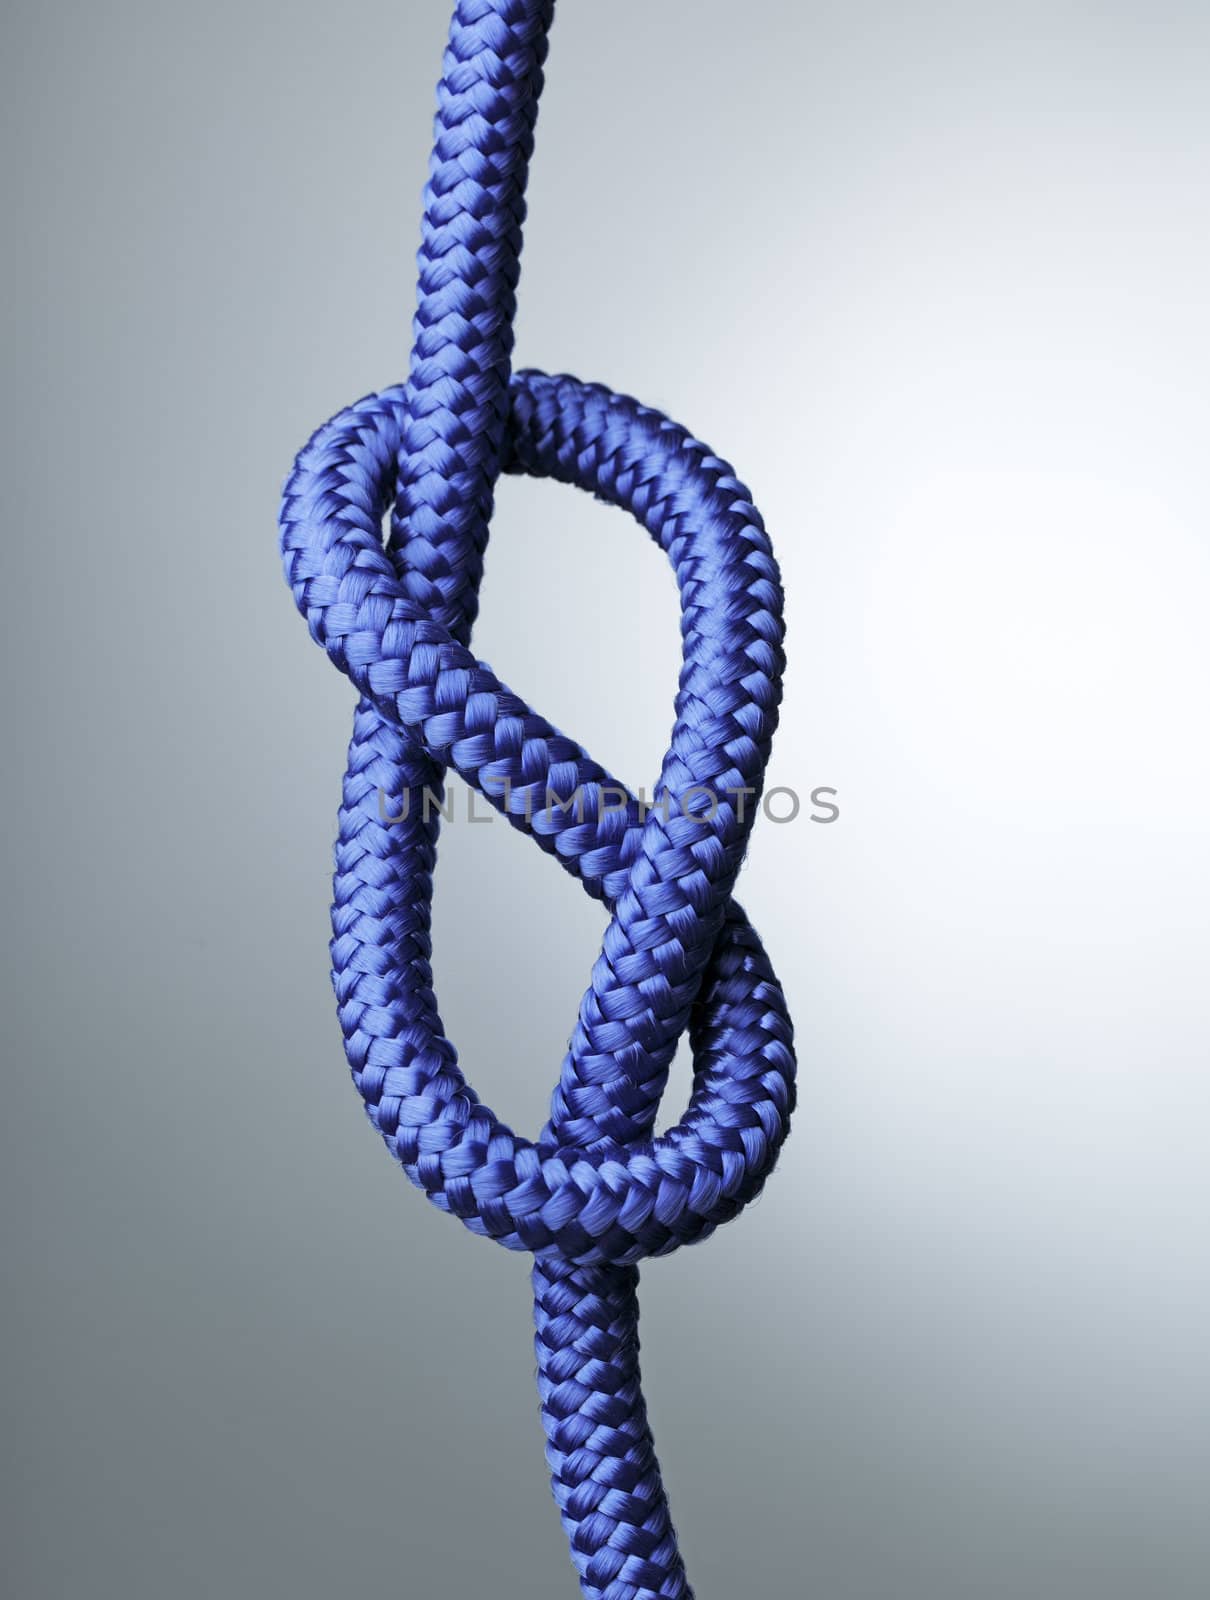 Figure of eight knot by Stocksnapper